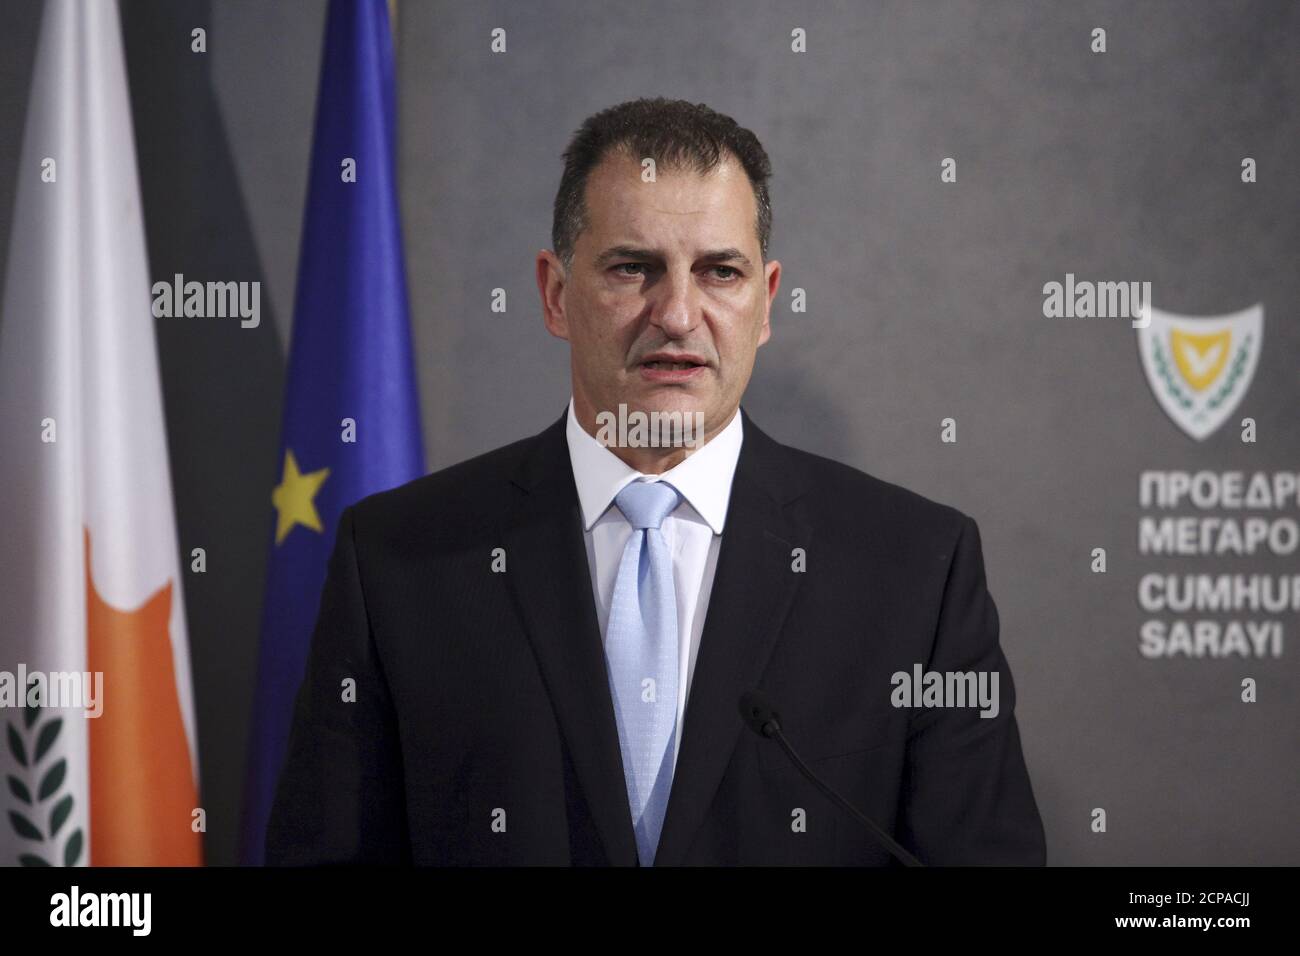 Yiorgos Lakkotrypis, Cyprus' Minister of Energy, Commerce, Industry and Tourism, speaks during a news conference at the presidential palace in Nicosia, Cyprus November 23, 2015. Noble Energy has sought approval from the Cypriot government to include Britain's BG Group in a consortium holding rights over a natural gas field in the eastern Mediterranean, Cyprus's energy minister Lakkotrypis said on Monday. Lakkotrypis said Noble would remain administrator over the offshore field, known as 'Block 12', with it and BG Group holding 35 percent each and Israel's Delek Group holding 30 percent. The is Stock Photo